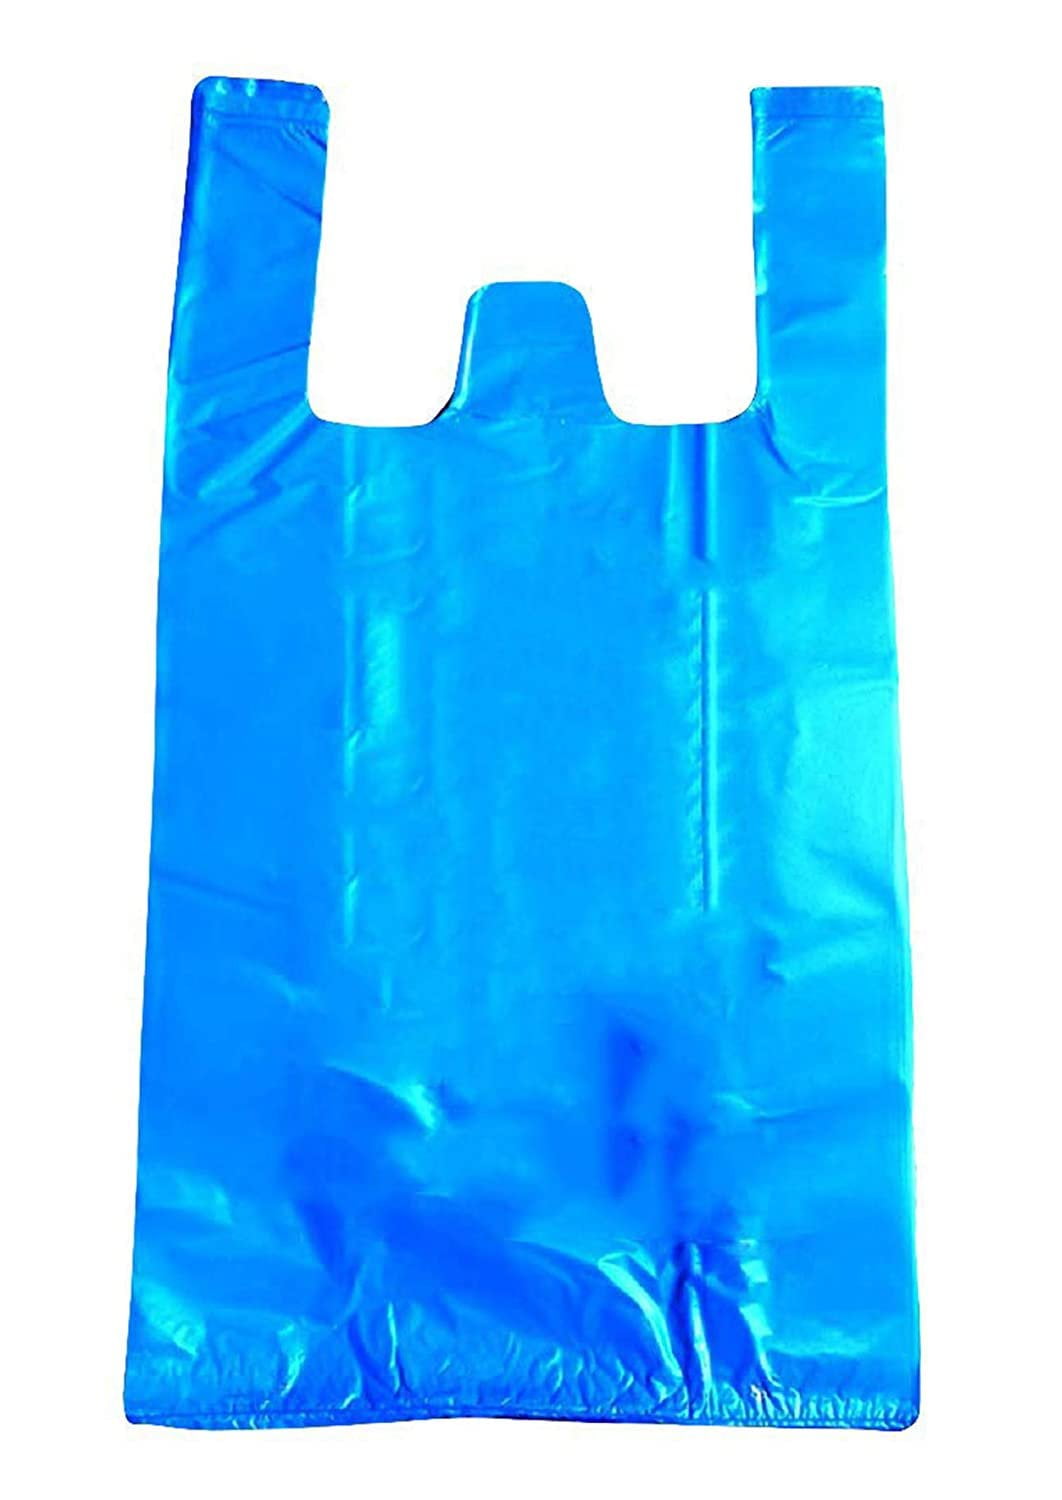 StoBag 10pcs Gold/Blue Frosted Plastic Bags Travel Close Tshirt